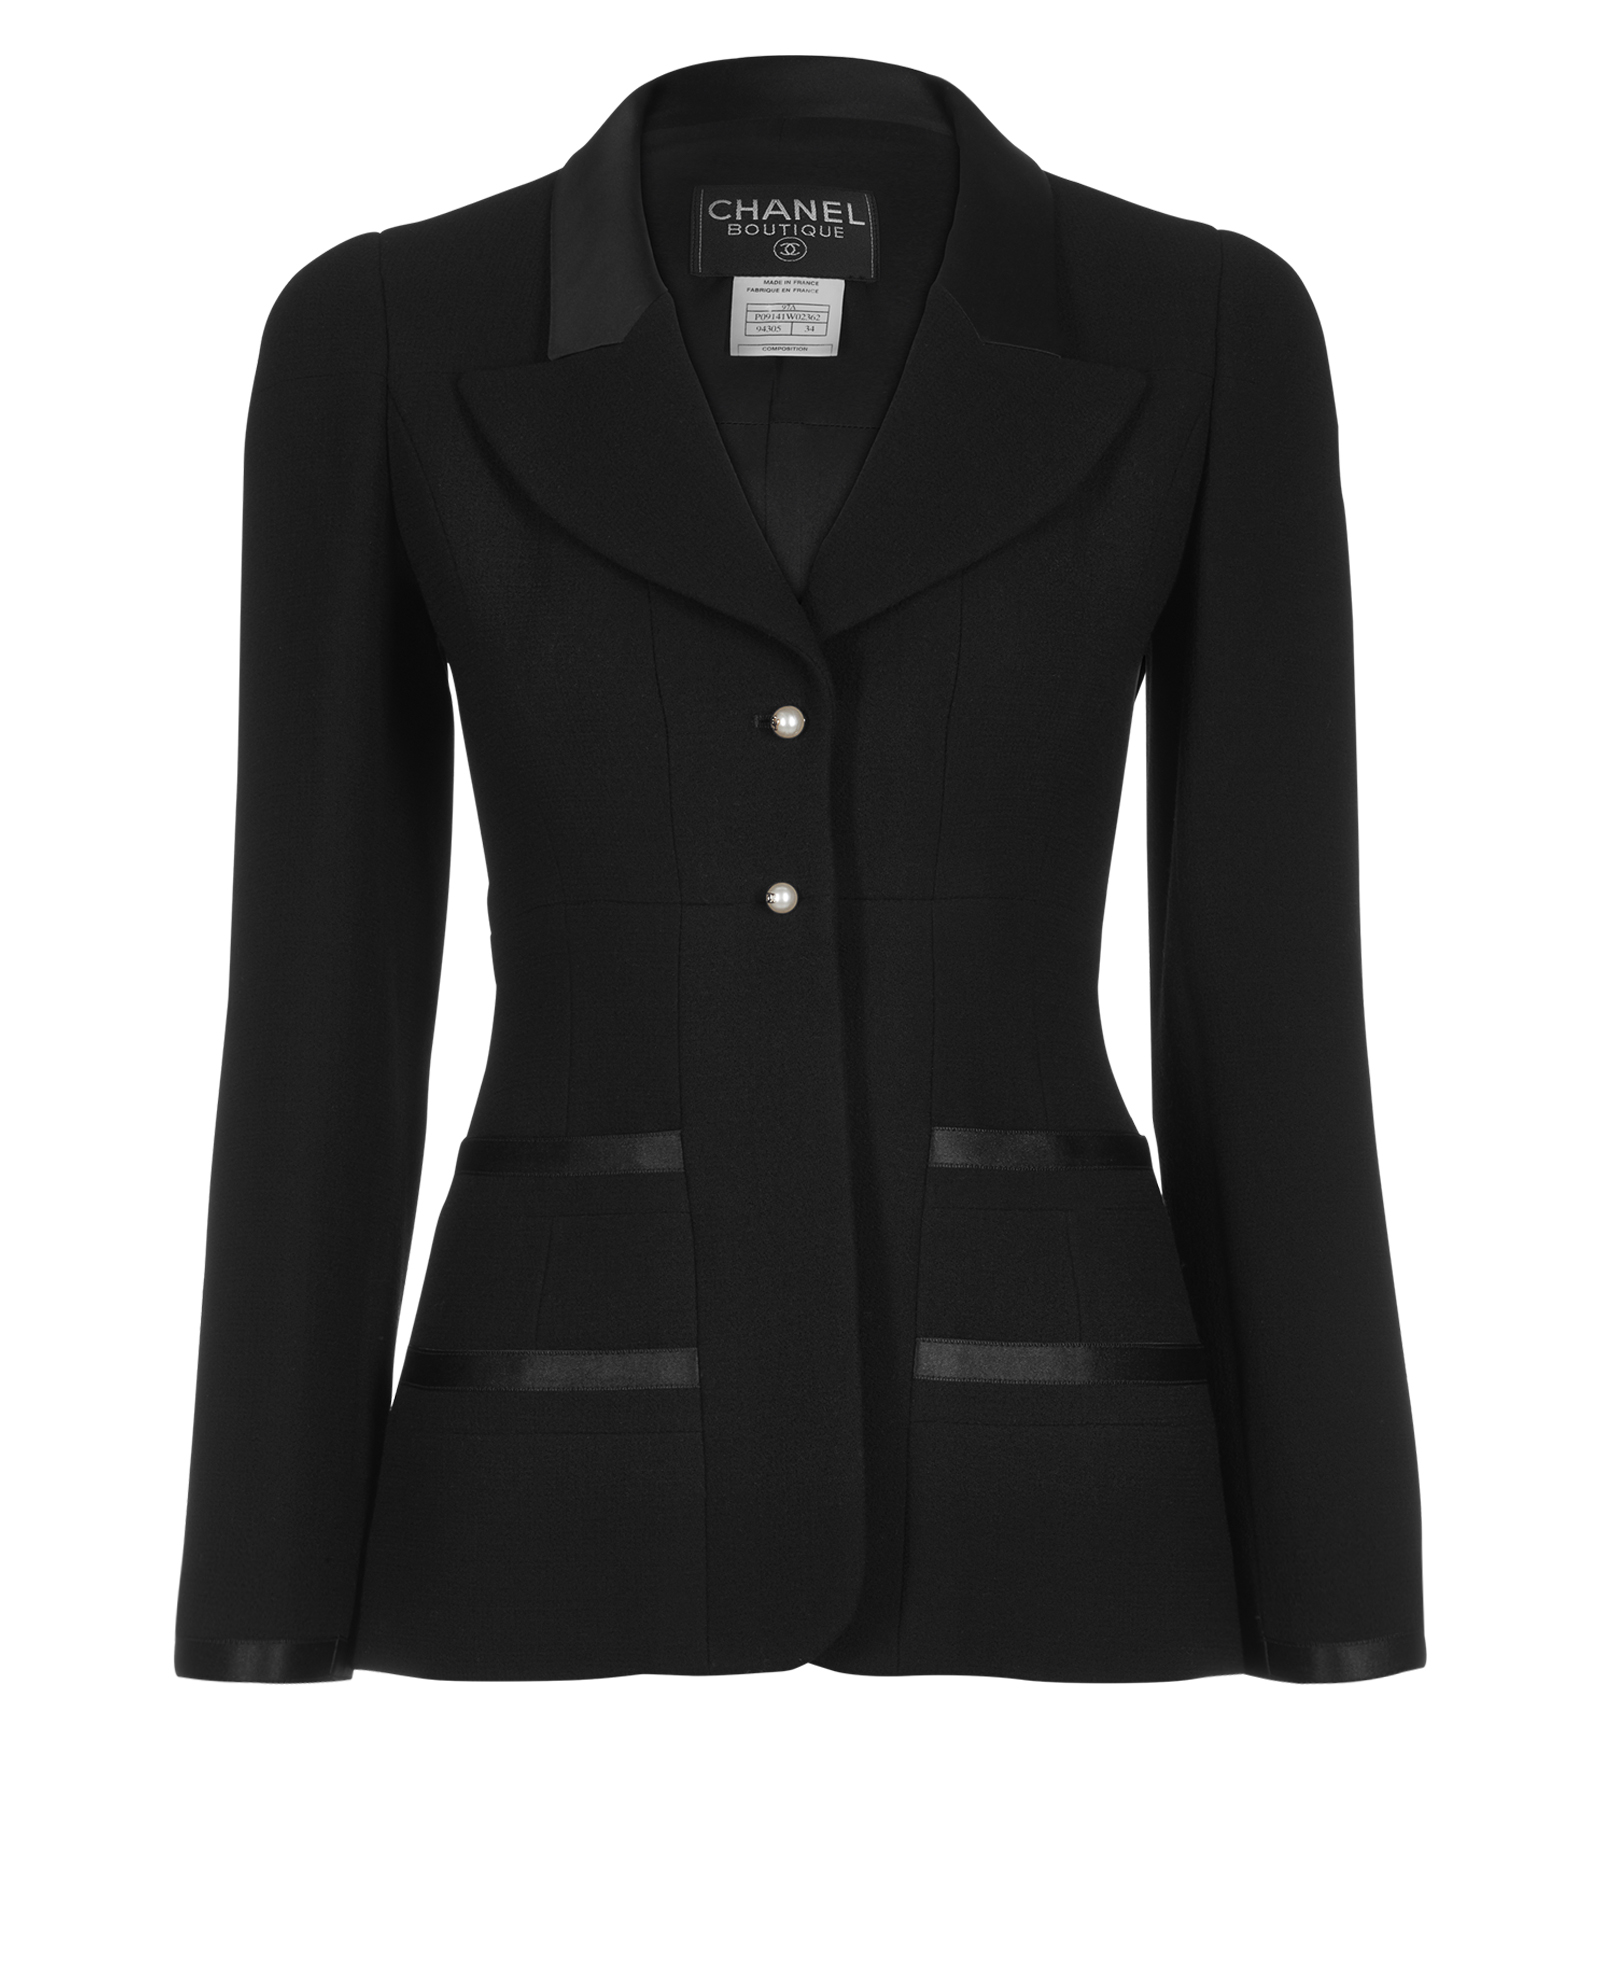 Chanel Black Two Piece Suit, Jackets - Designer Exchange | Buy Sell Exchange